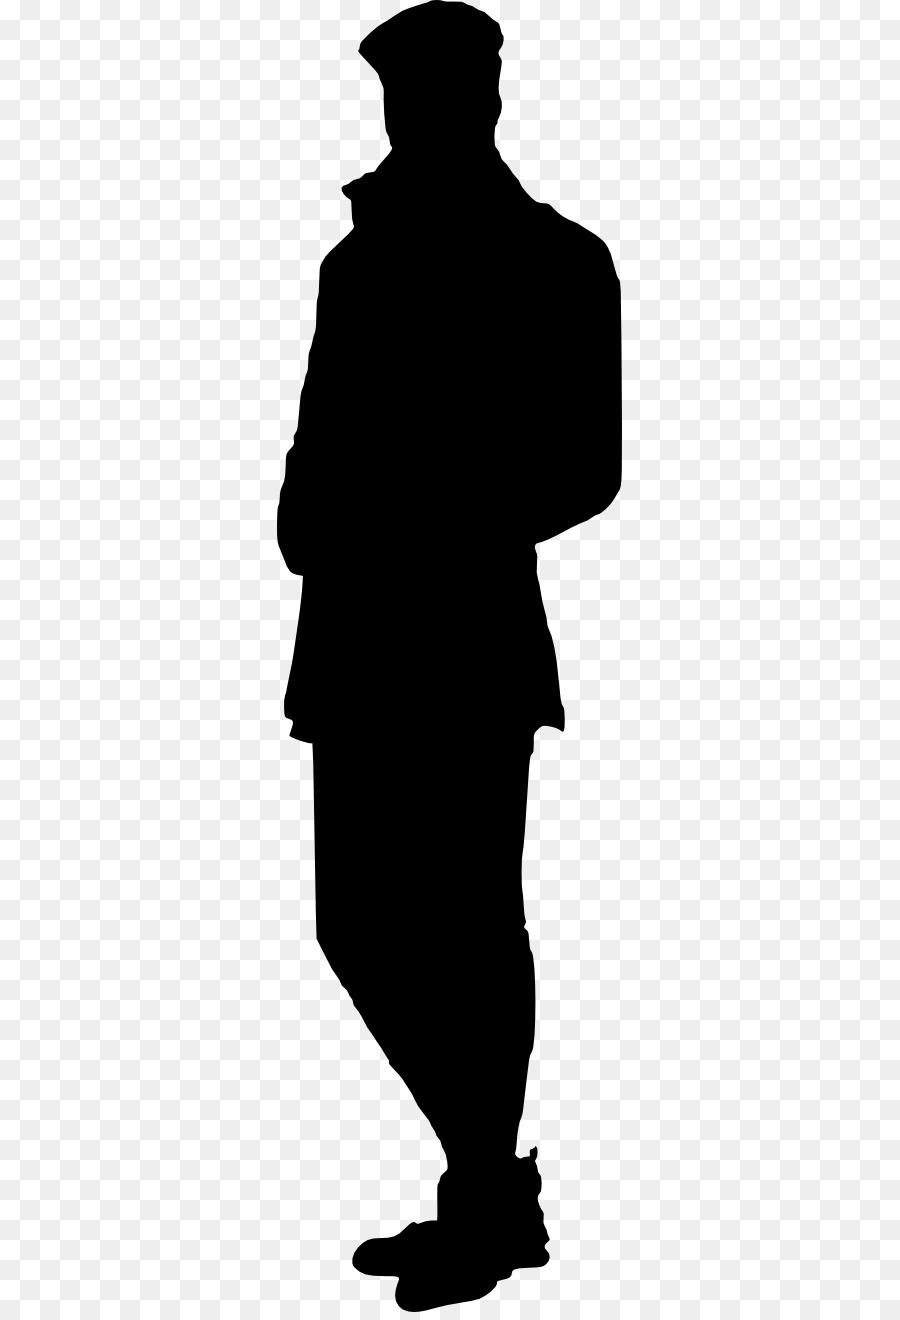 Silhouette Portable Network Graphics Transparency Vector graphics Image - spy silhouette png download - 345*1312 - Free Transparent Silhouette png Download.